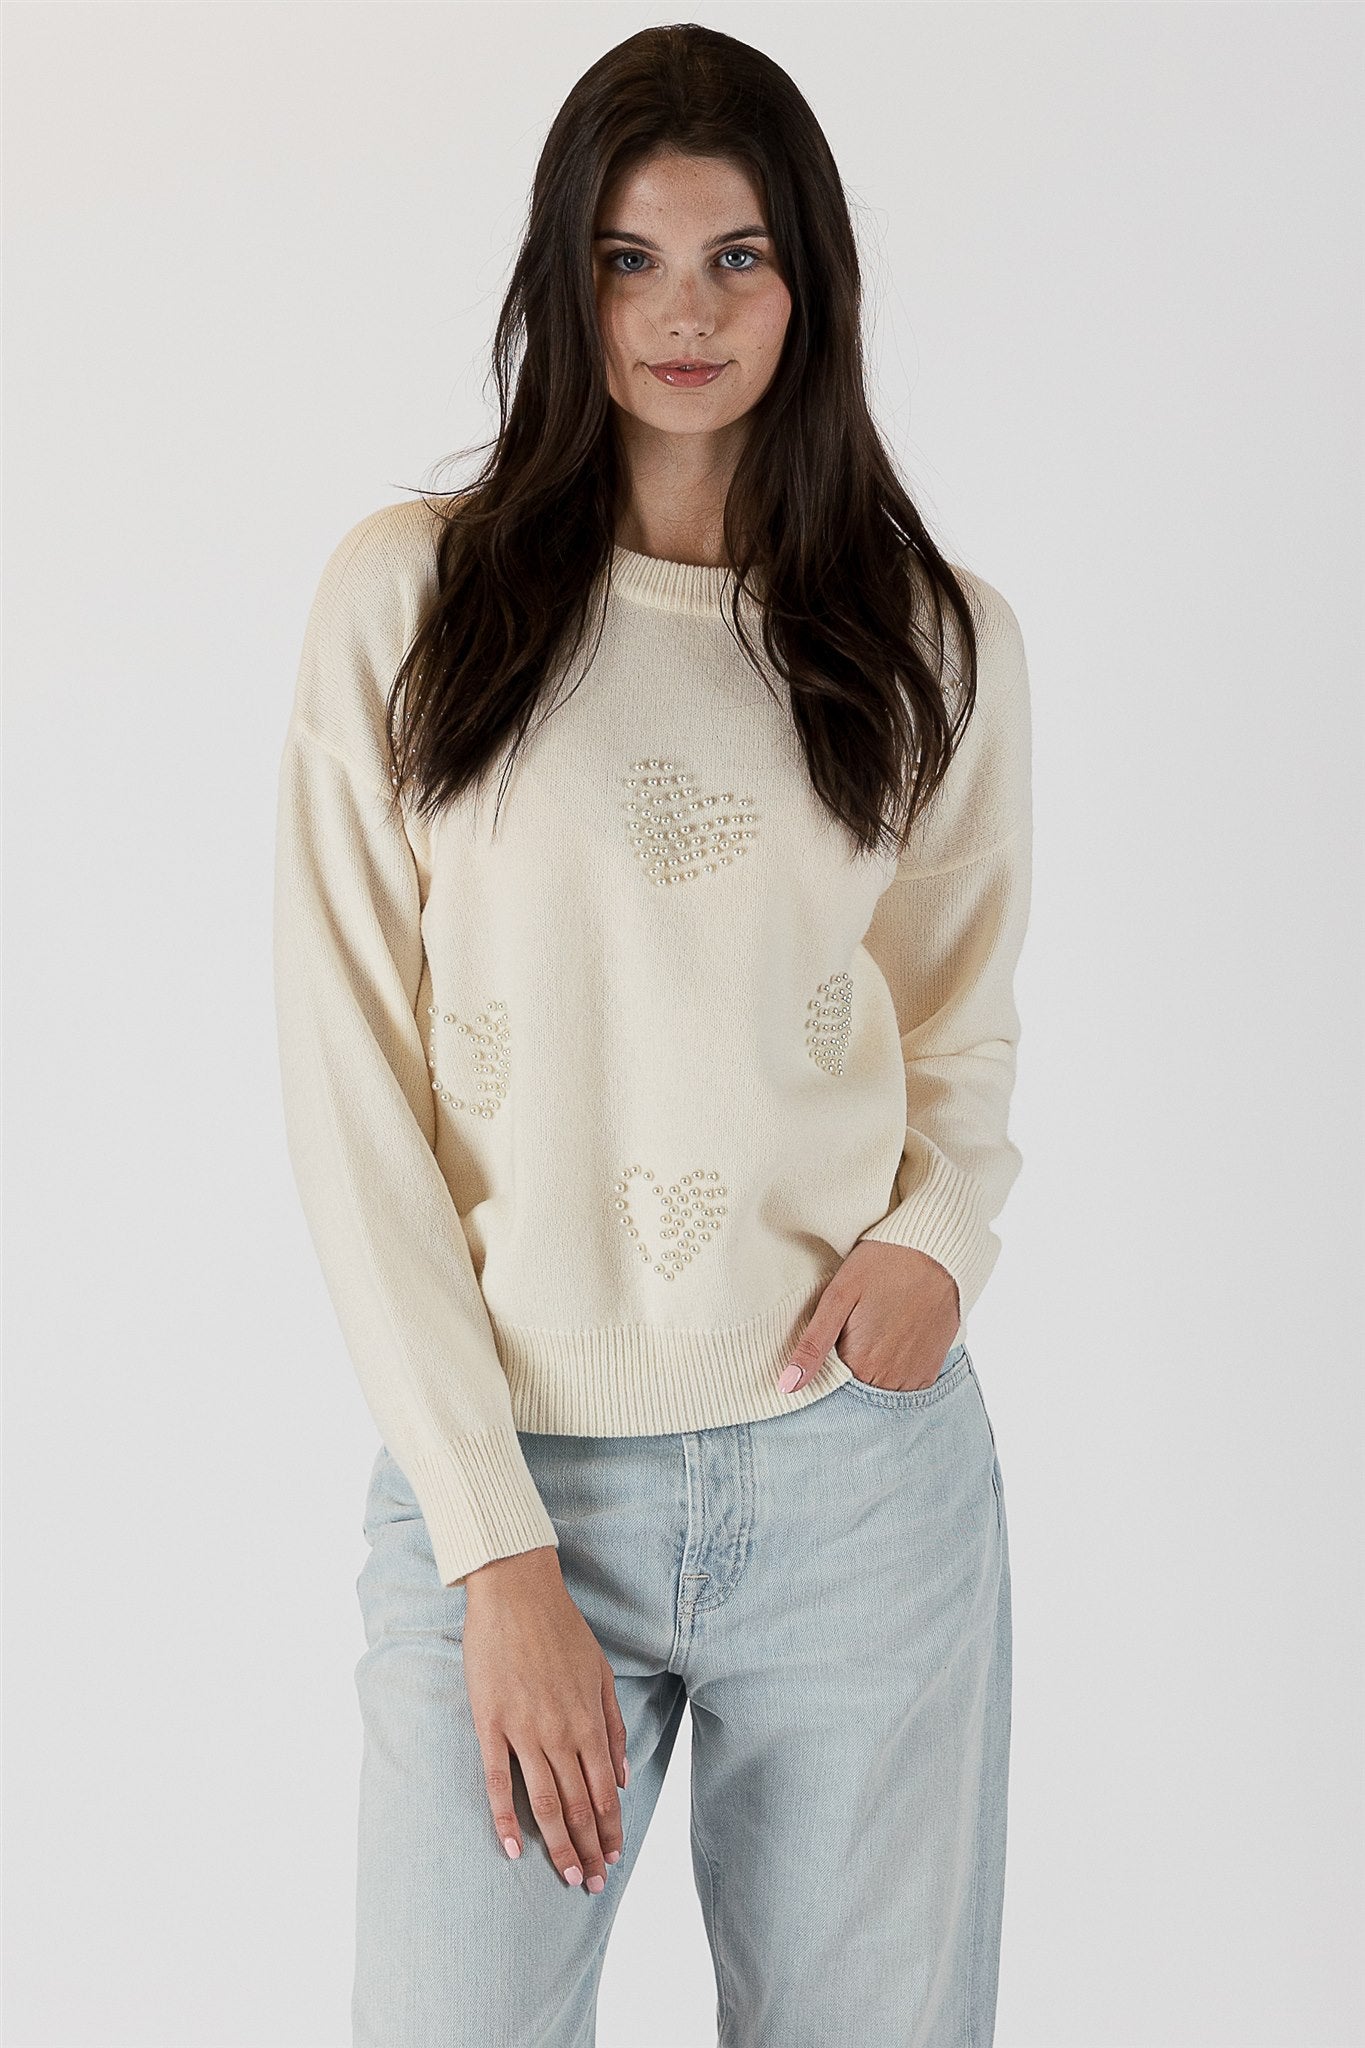 Lyla+Luxe Top - Pearl Sweater - Off White